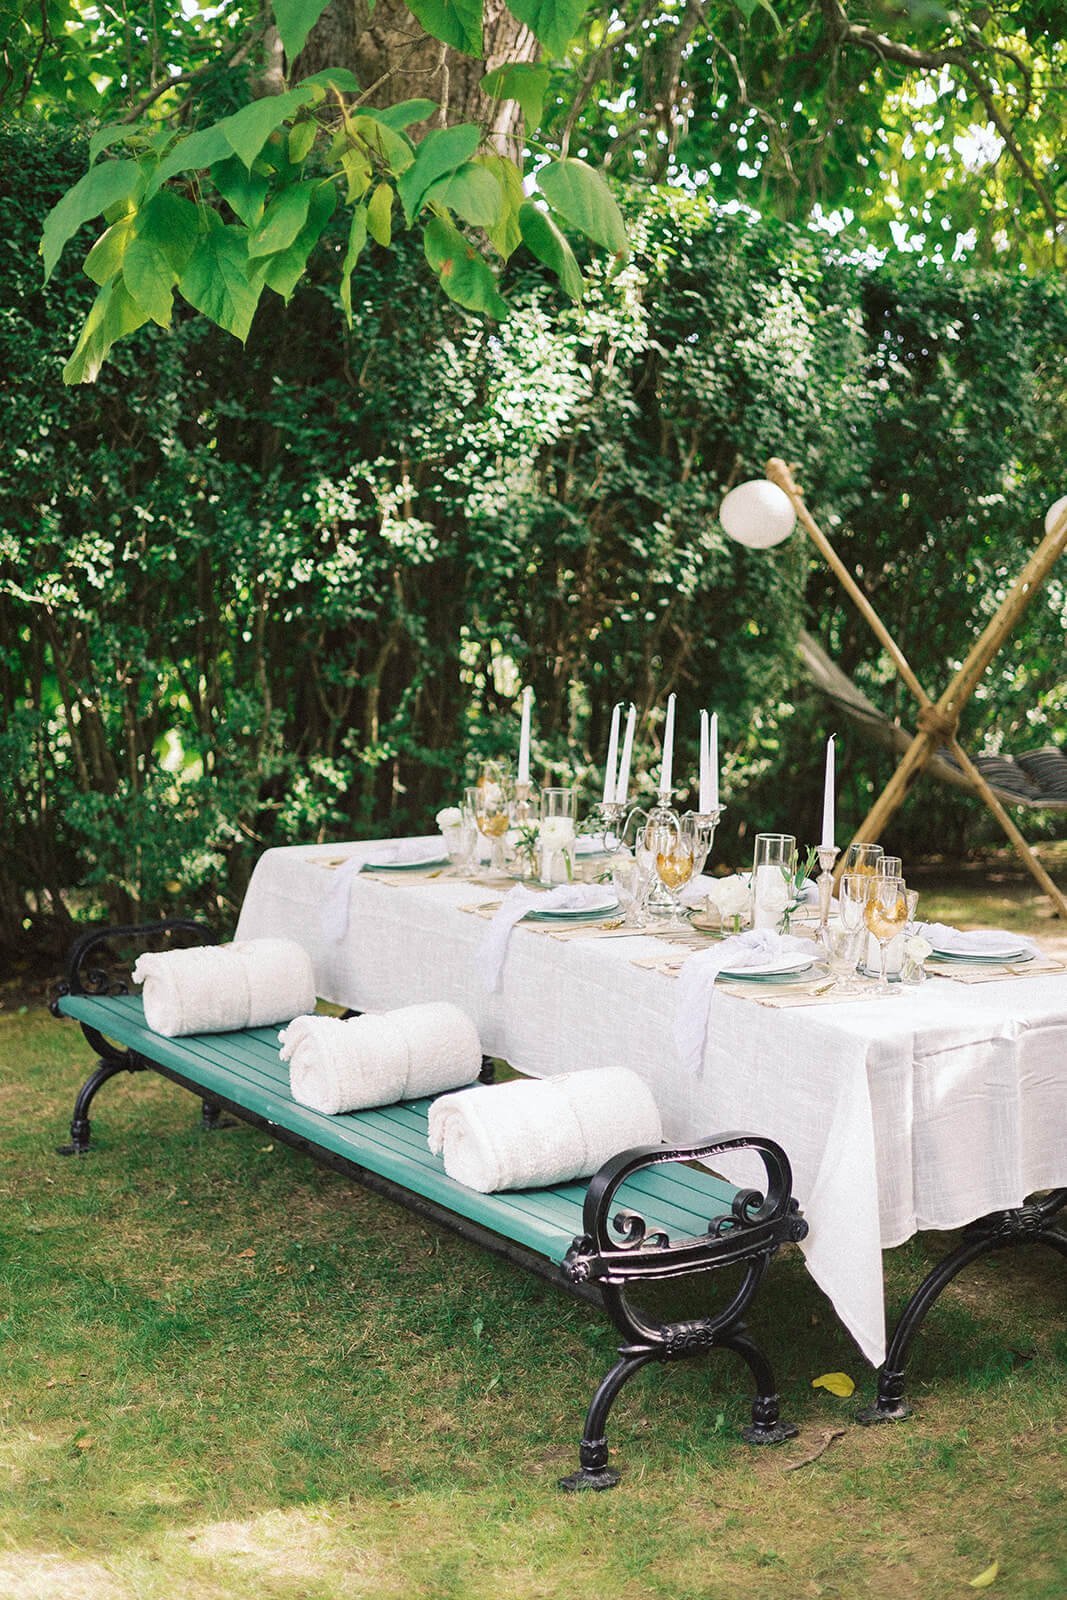 A long table with white linens and green and white cushions for a French picnic-style reception